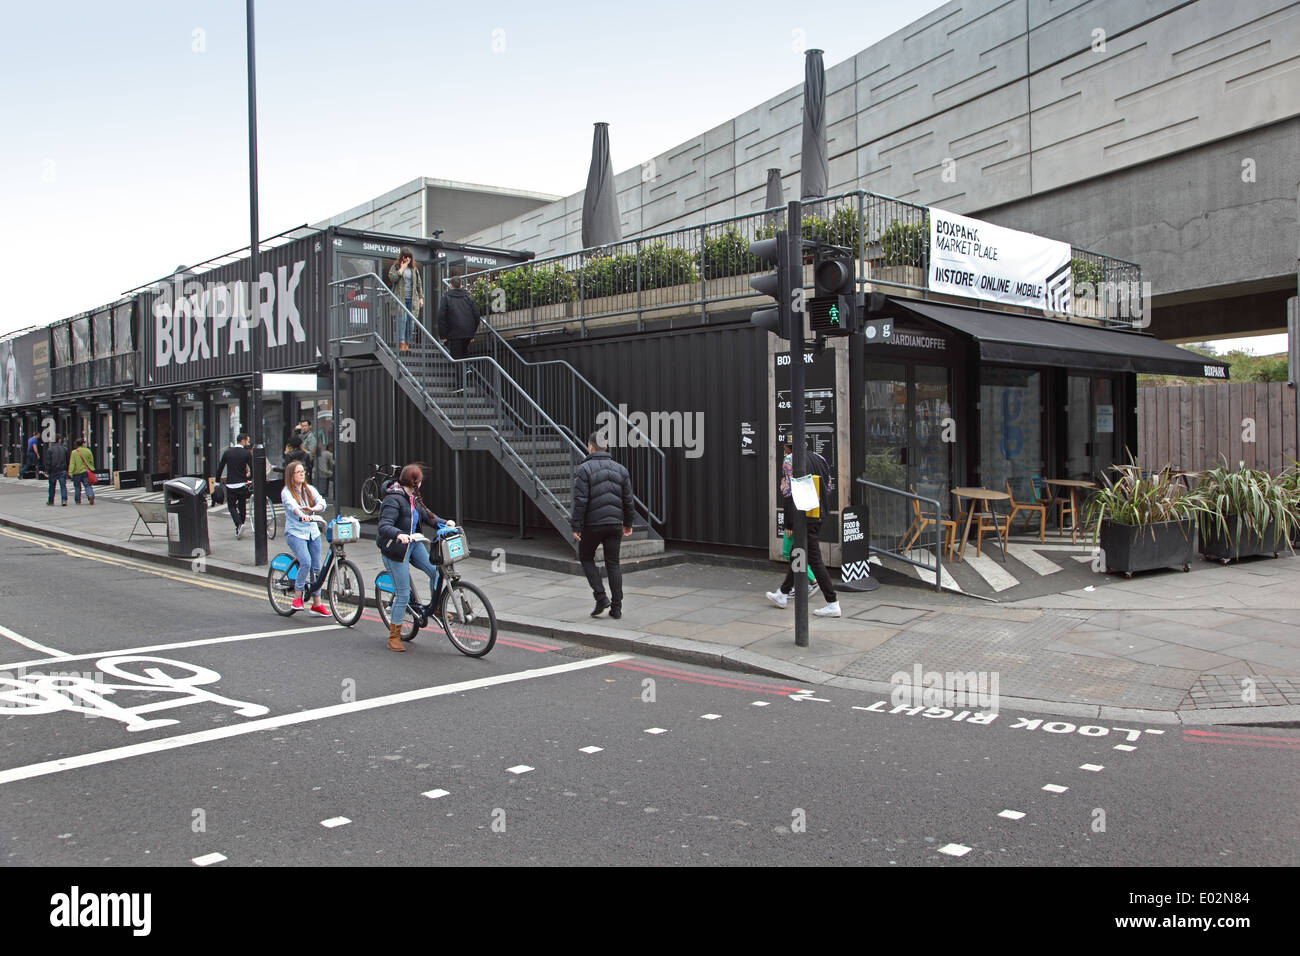 Boxpark. Pop-up shops and restaurants housed in shipping containers in Shoreditch, London. 2 girls on Boris-bikes in foreground Stock Photo